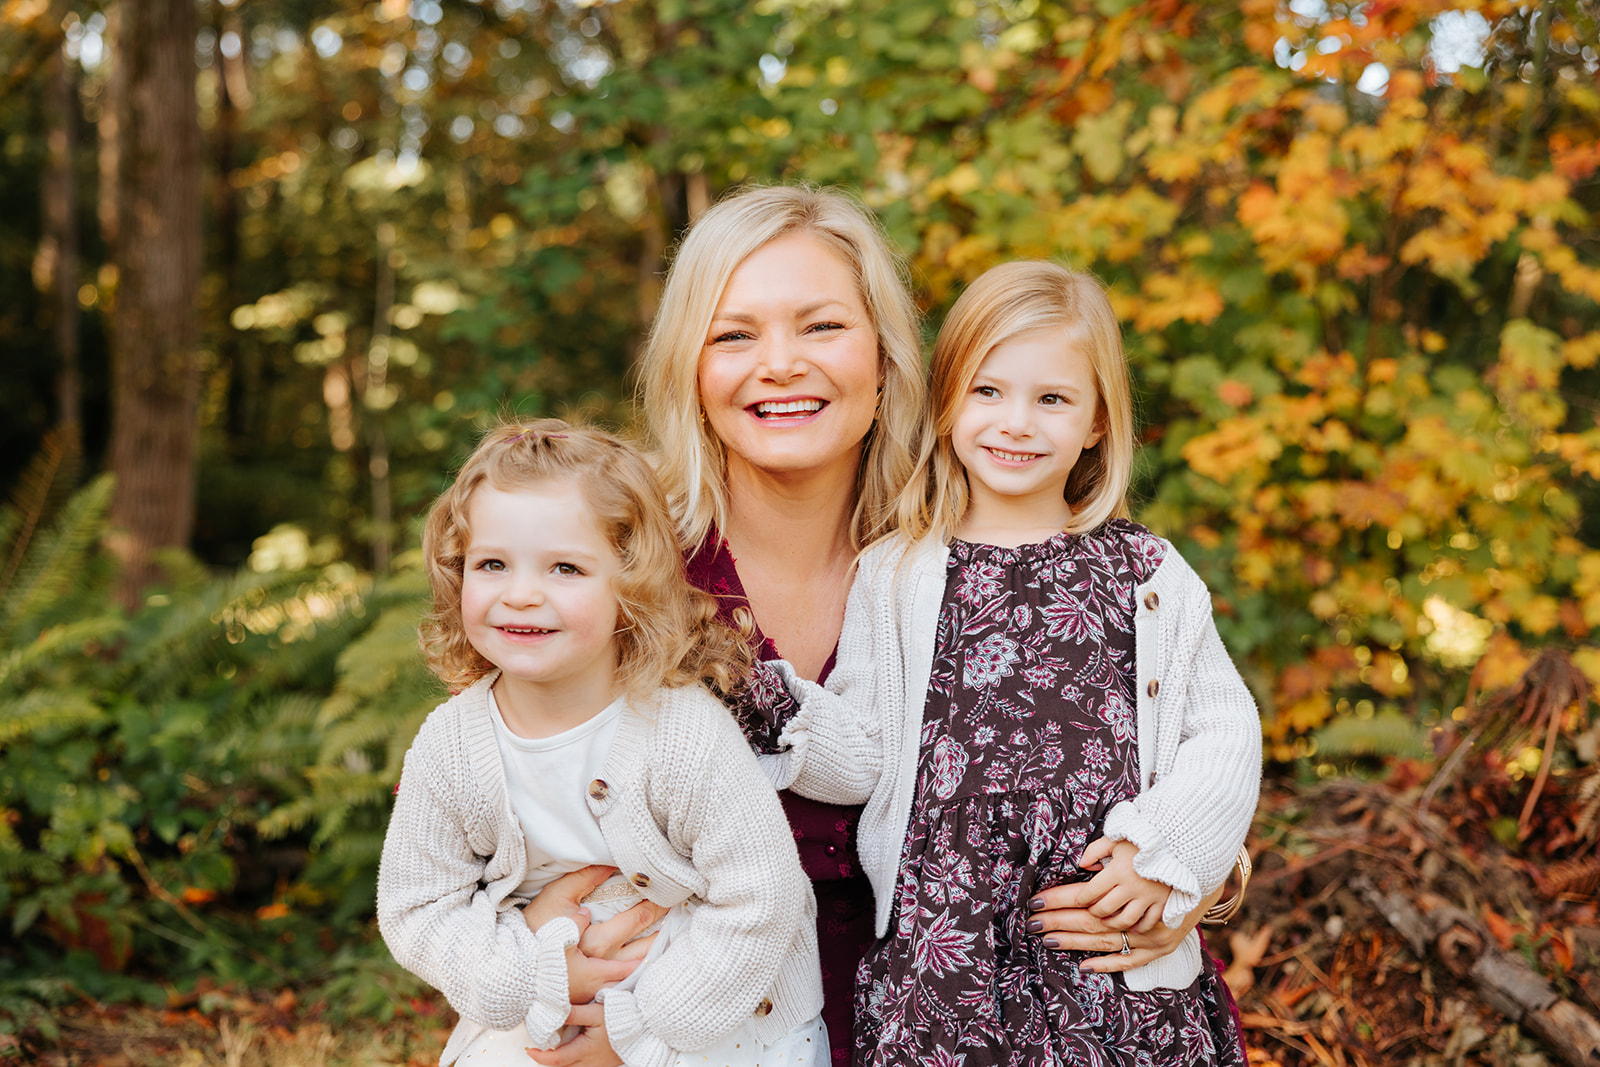 A photo of two young daughters hugging their mother and smiling at the camera in front of colorful fall foliage.